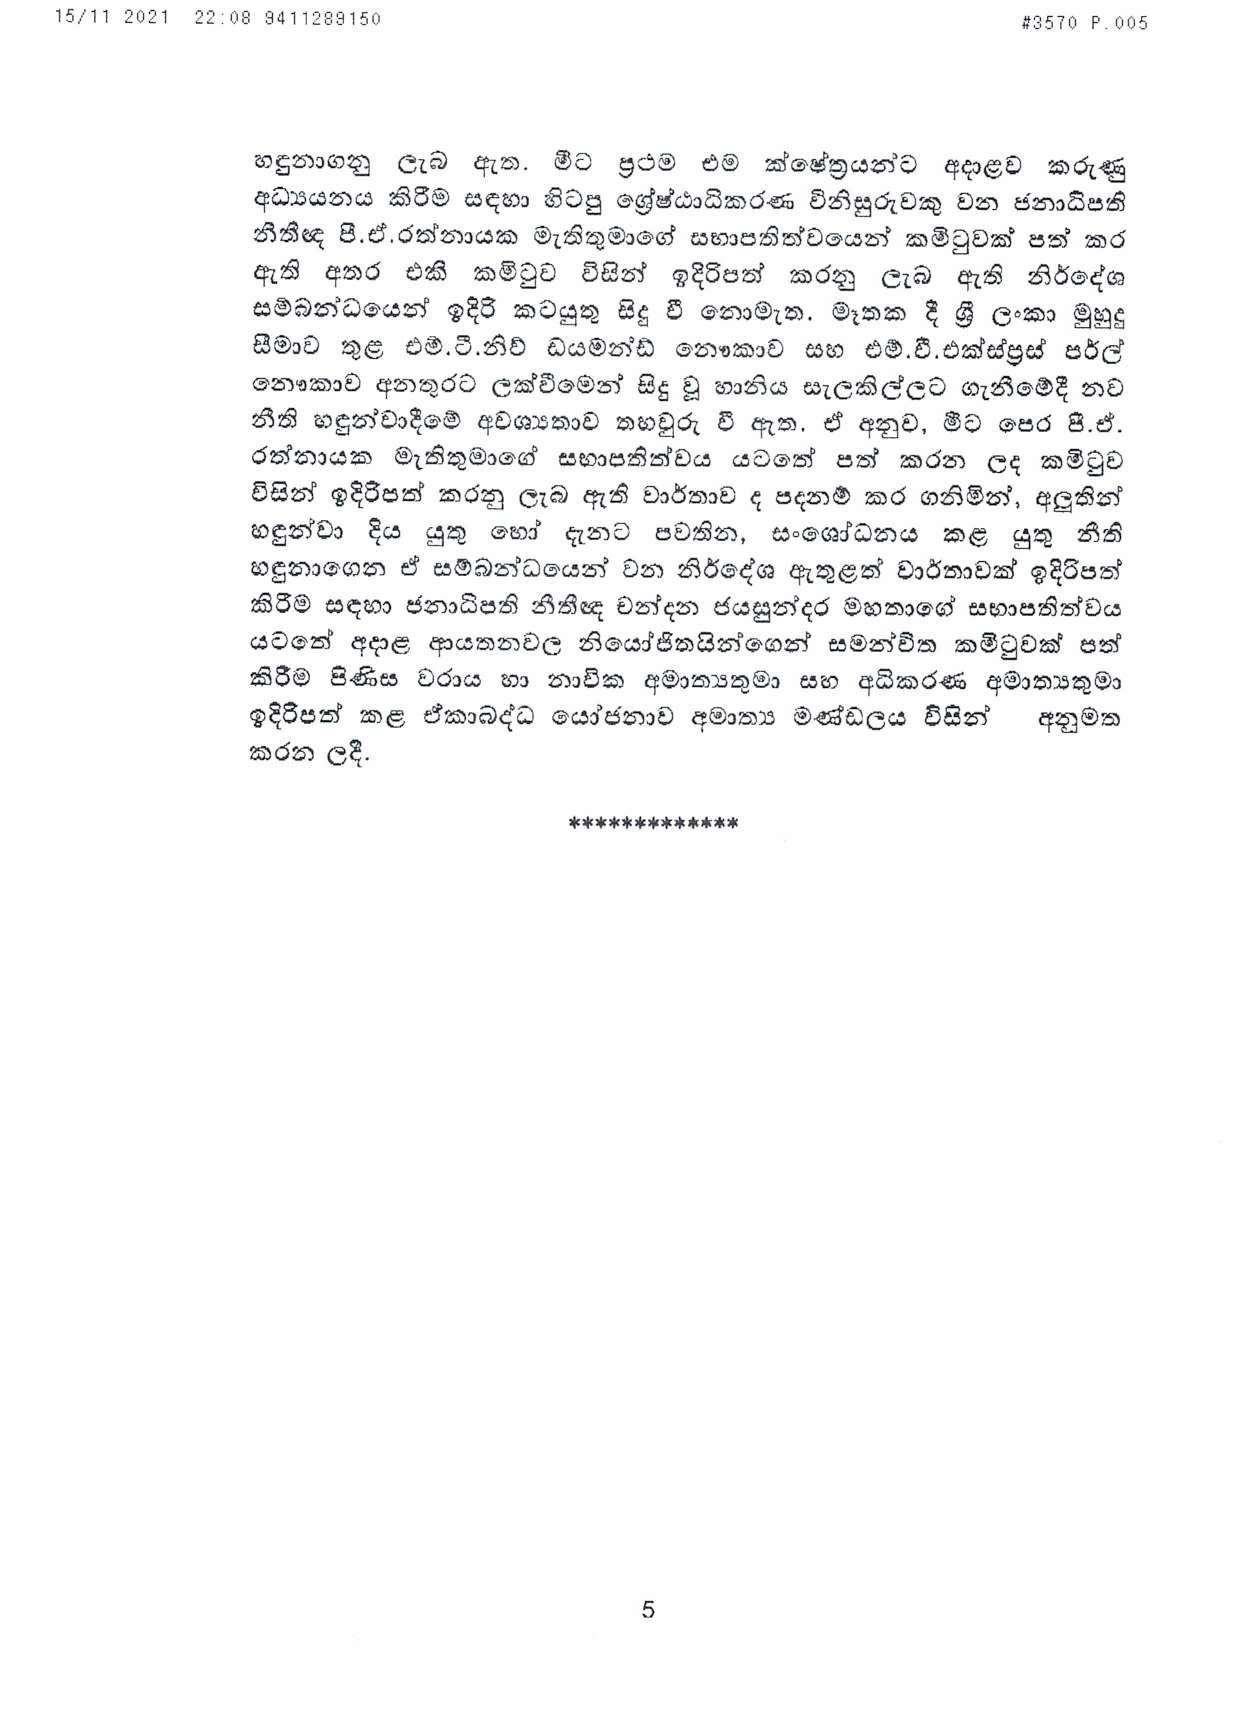 Cabinet Decision on 15.11.2021 compressed page 005